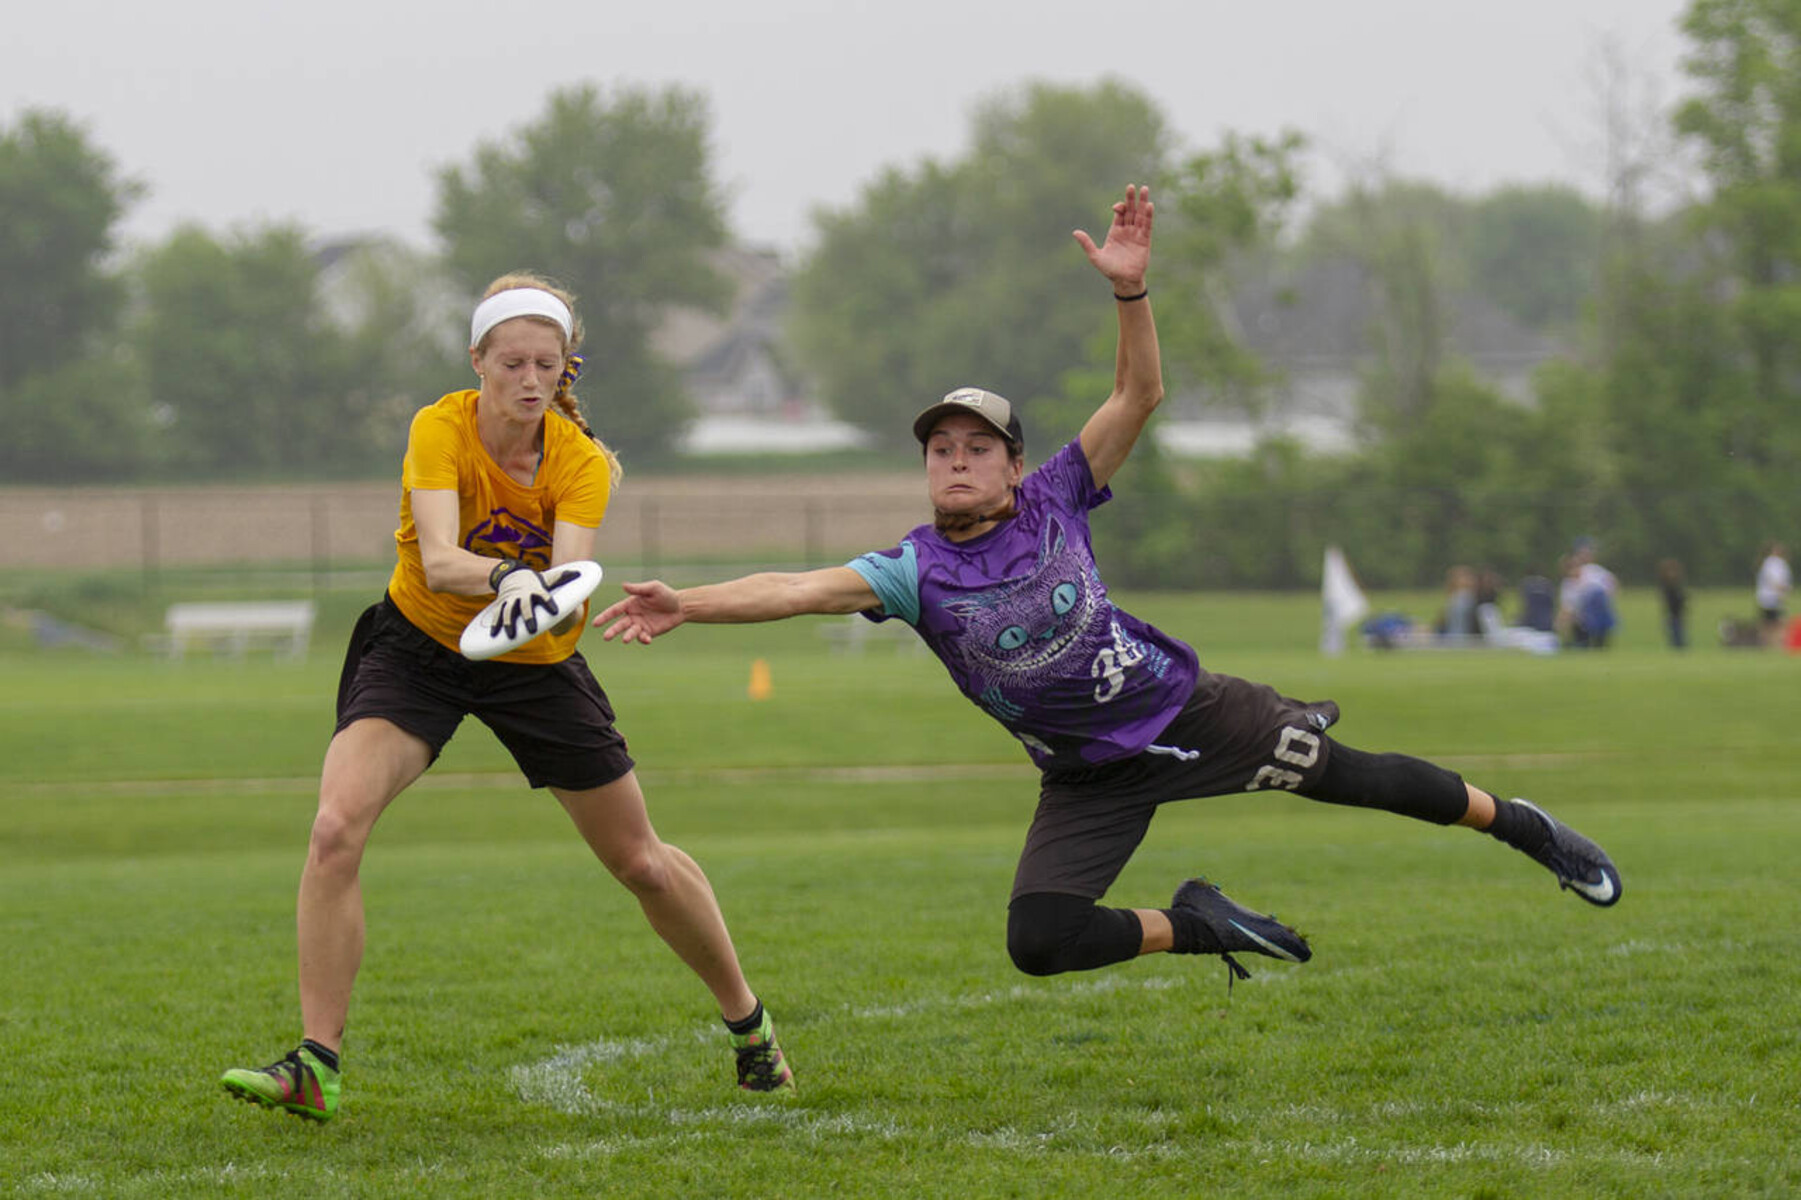 11-facts-about-frisbee-tournament